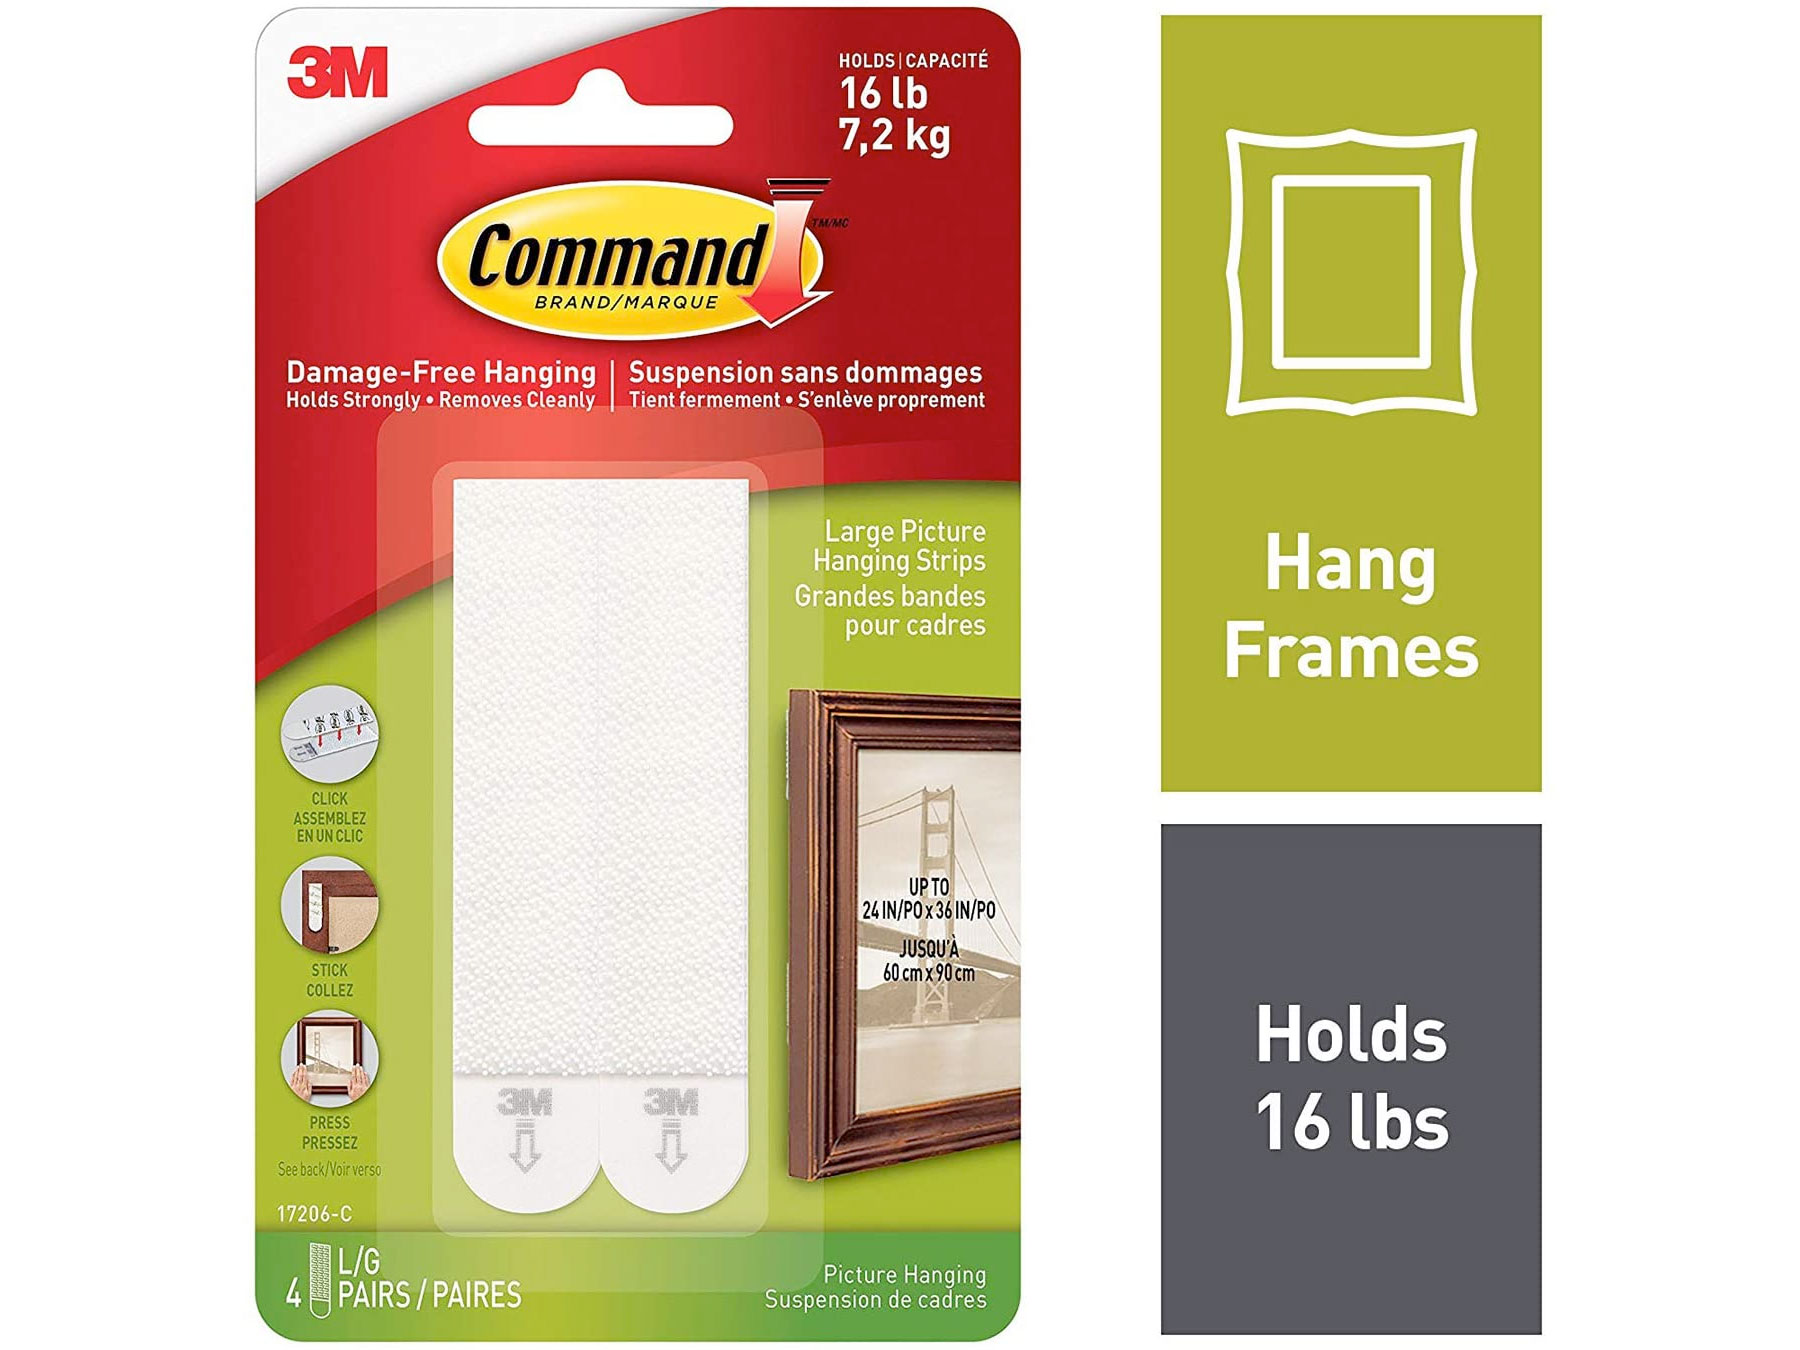 Amazon：3M Large Picture Hanging Strips(4 Pairs)只賣$1.50